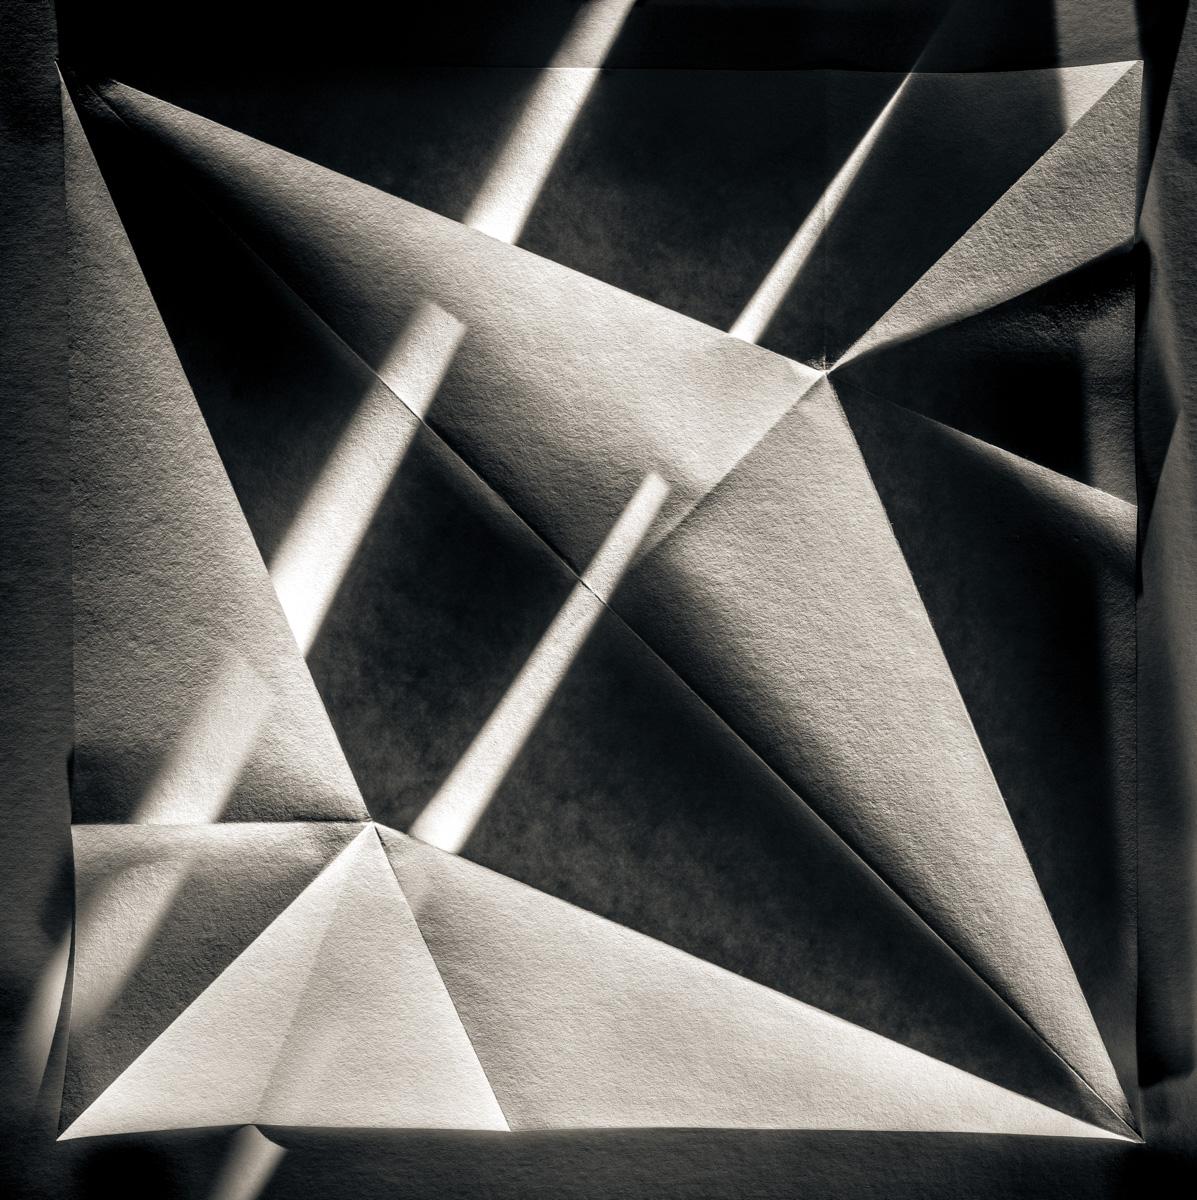 Limited Edition Black and White Photograph Origami Folds #18 

#18 from the Origami Folds series has been in several museum exhibitions including the James Michener Museum exhibit Light and Matter.

Astrophysicist Koryo Miura created the unfolding